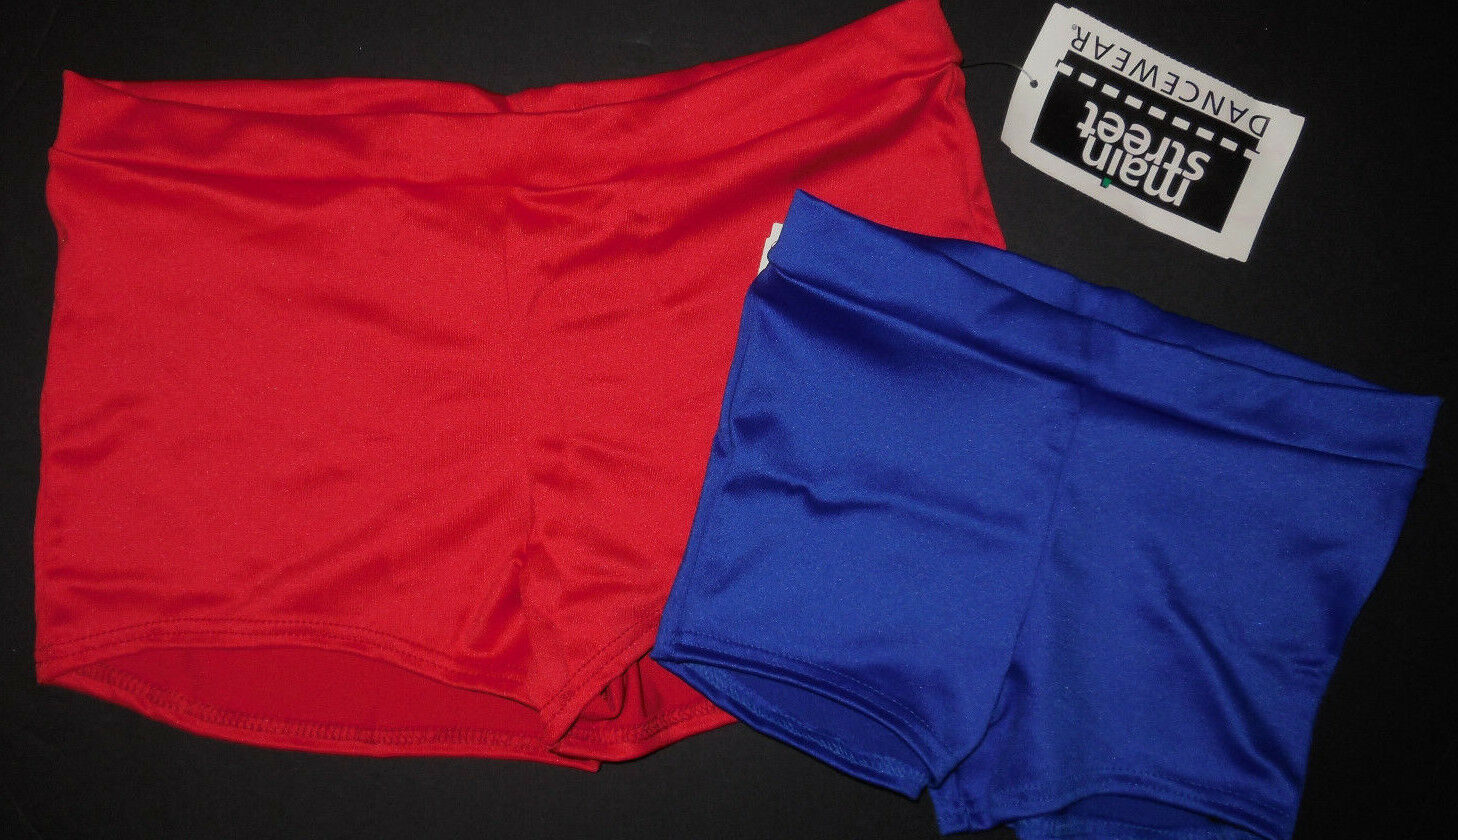 Boy Cut Trunks Booty Shorts 4 Color Choices Red, Blue,plum,black Adult/child